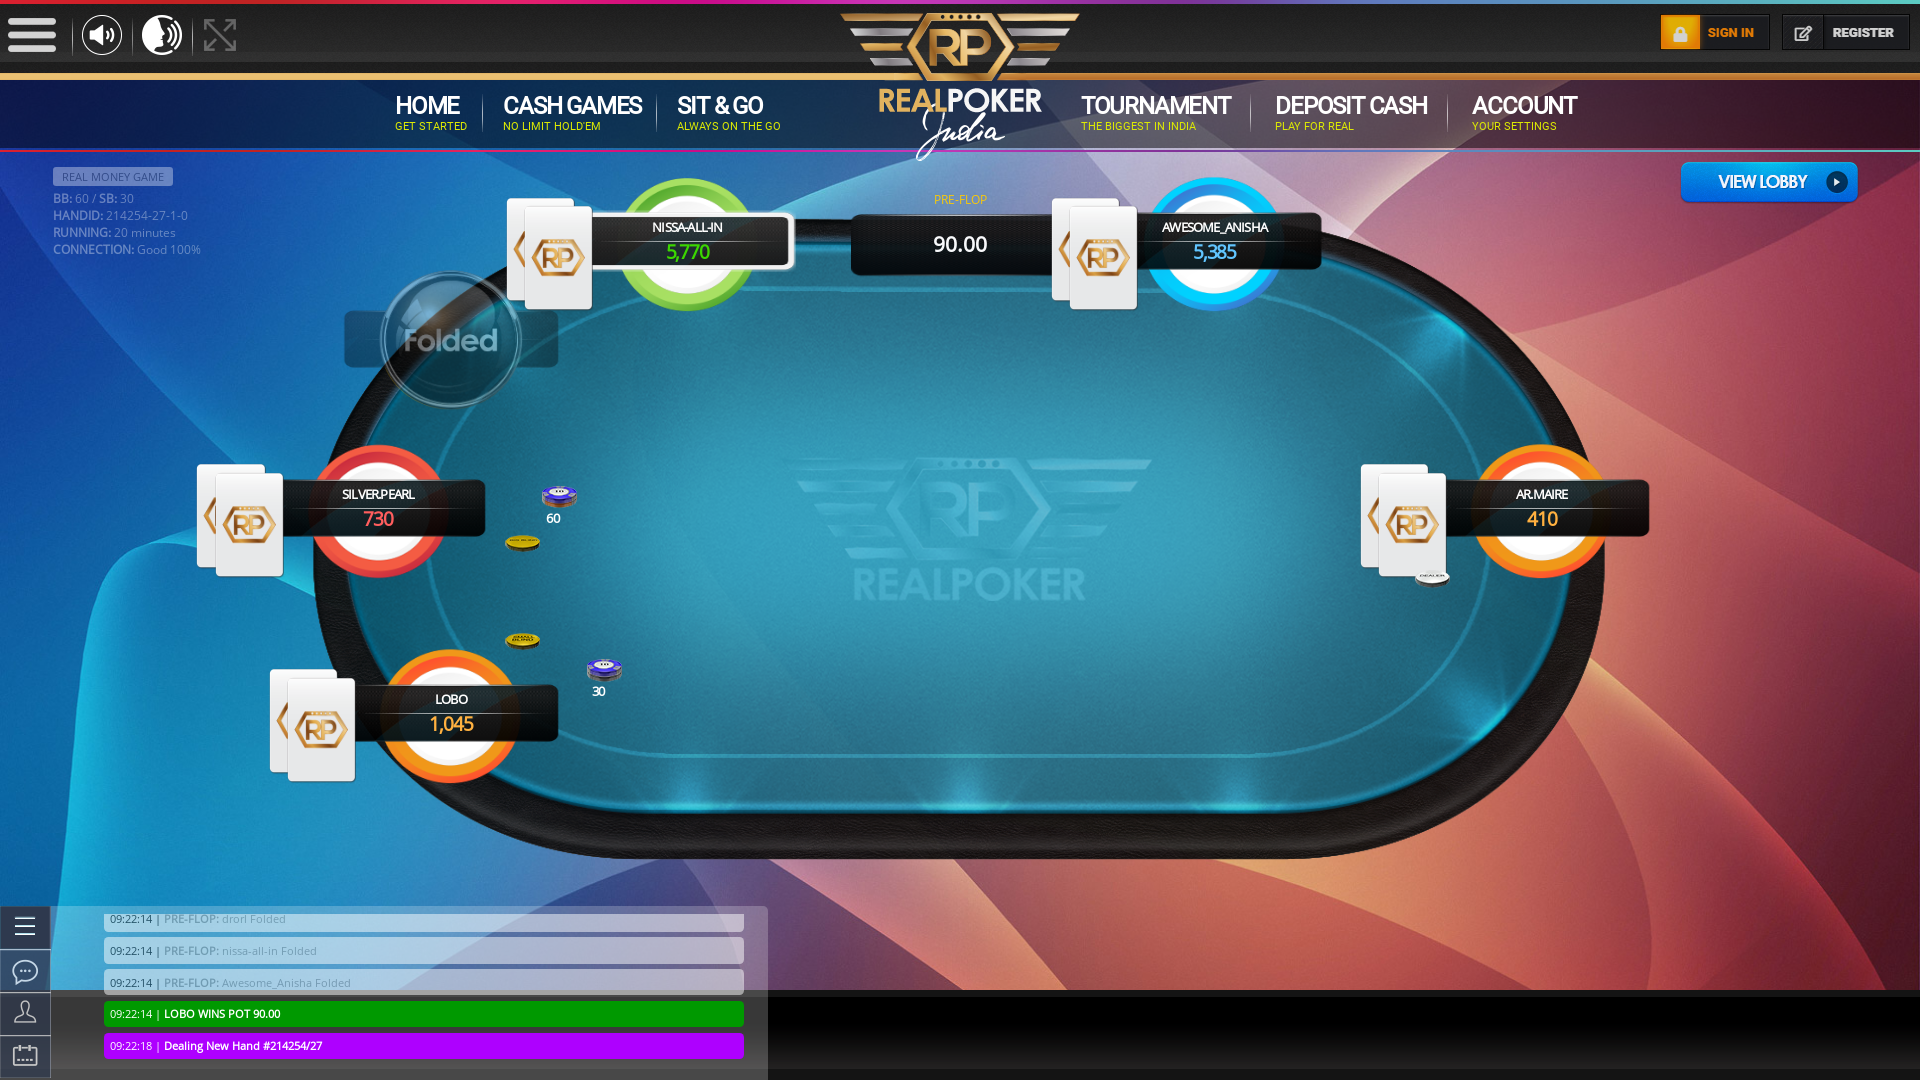 Real poker 10 player table in the 20th minute